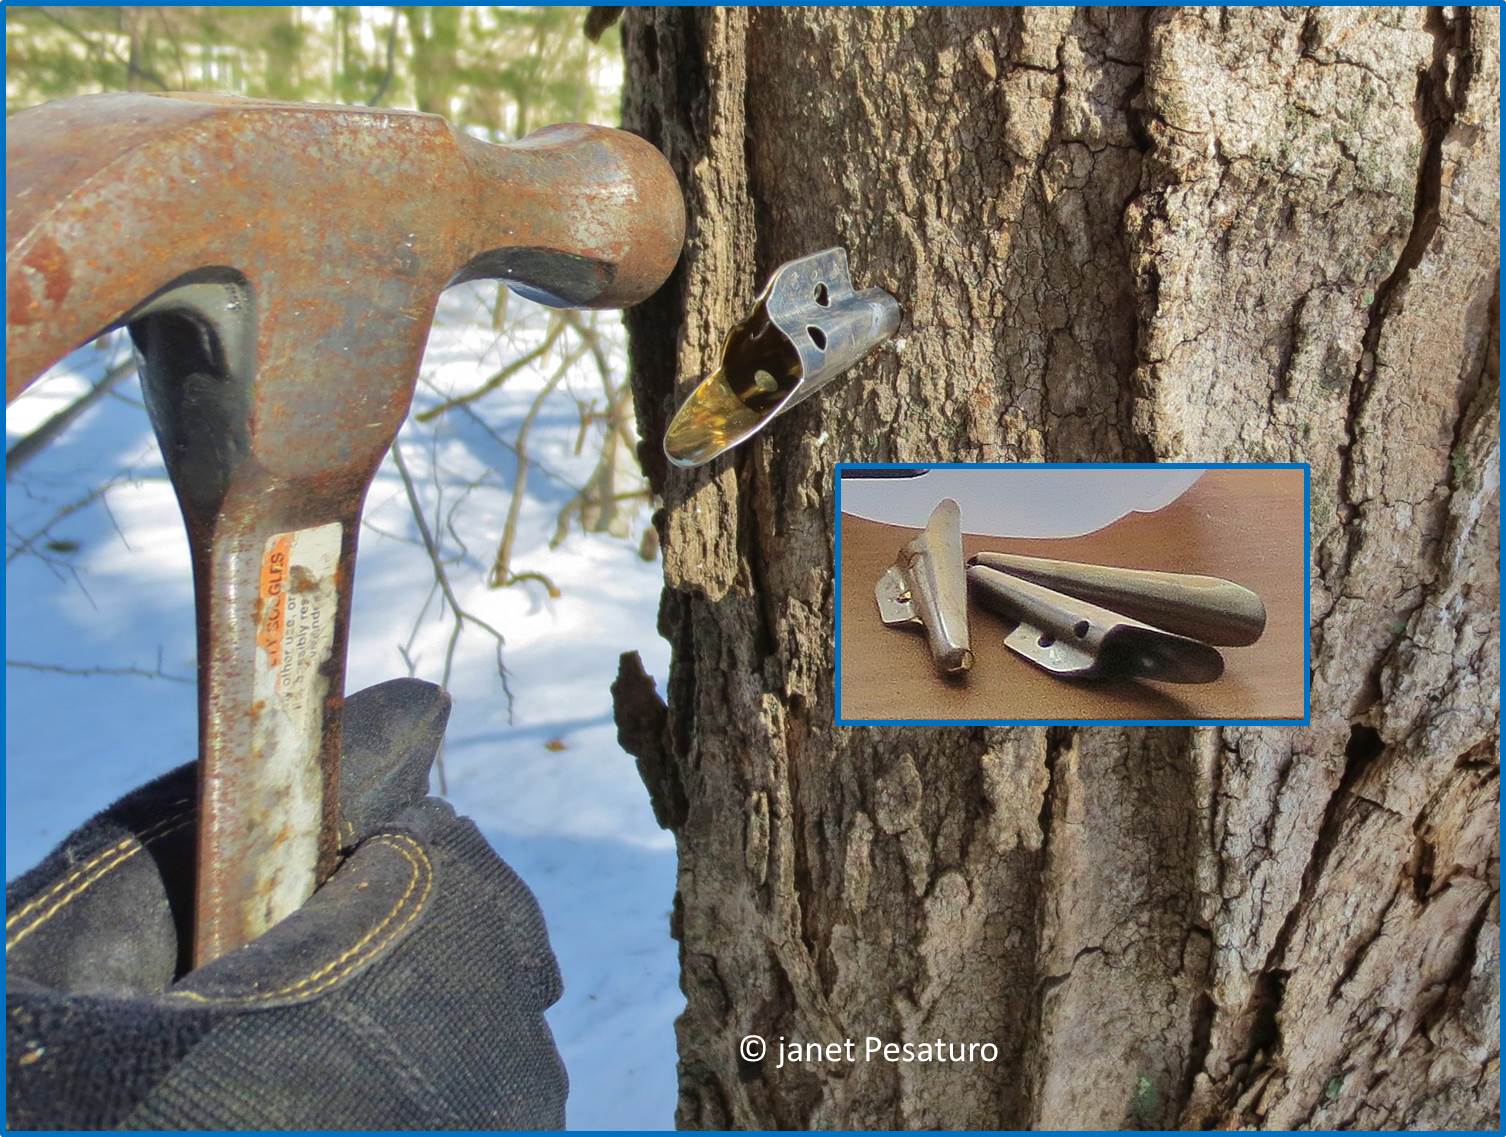 How to Make Maple Syrup I: Choosing Trees and Getting Sap